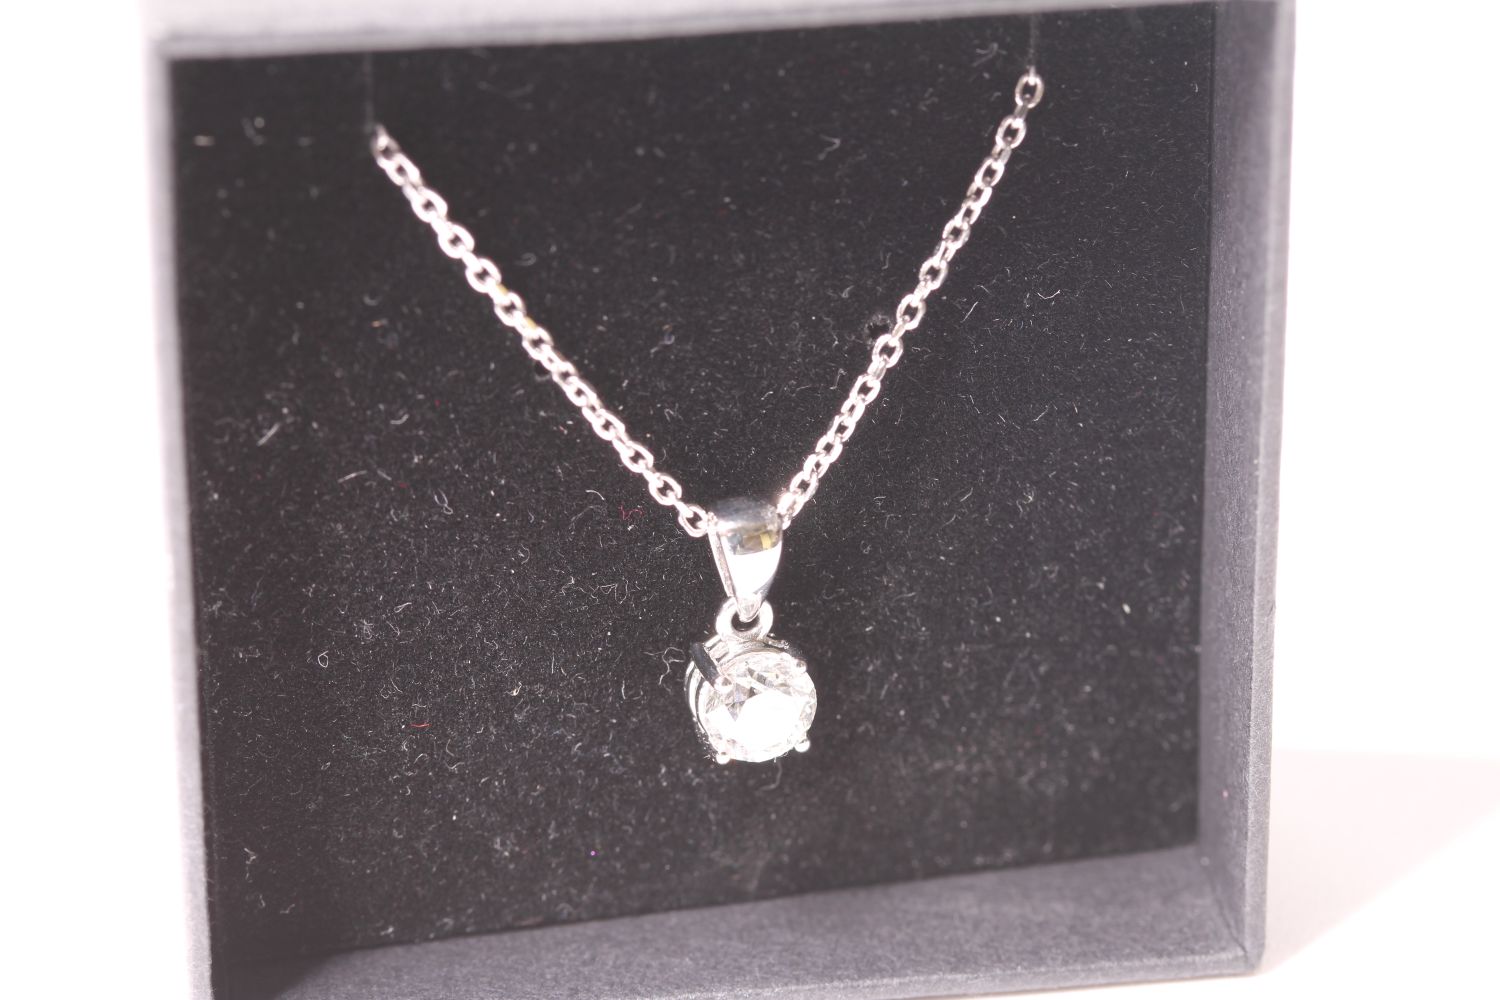 18ct white gold four claw diamond solitaire pendant and chain, boxed. RBC diamond 0.58ct